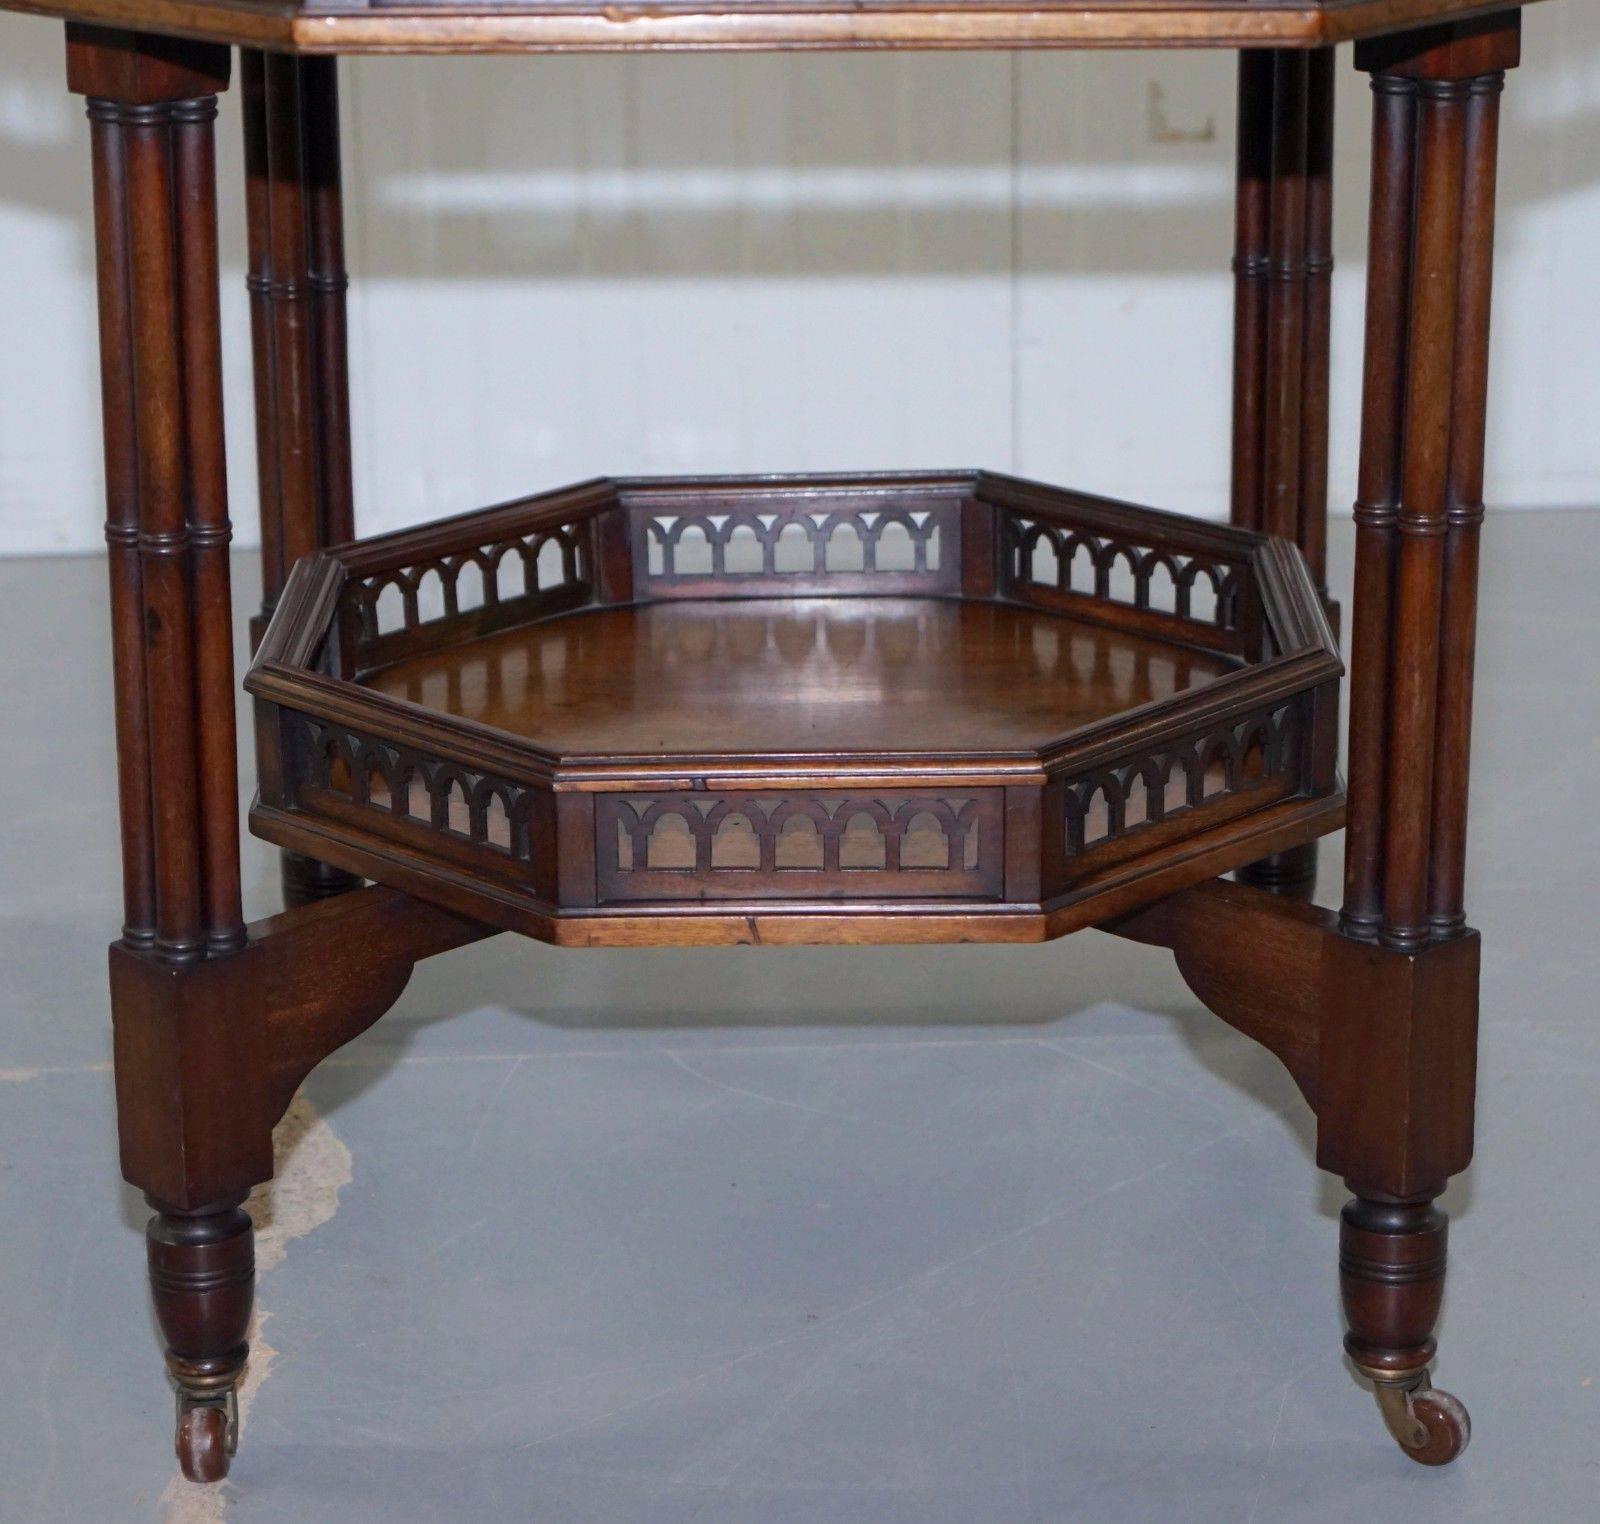 British Rare 18th Century Thomas Chippendale Clustered Column Leg Occasional Table